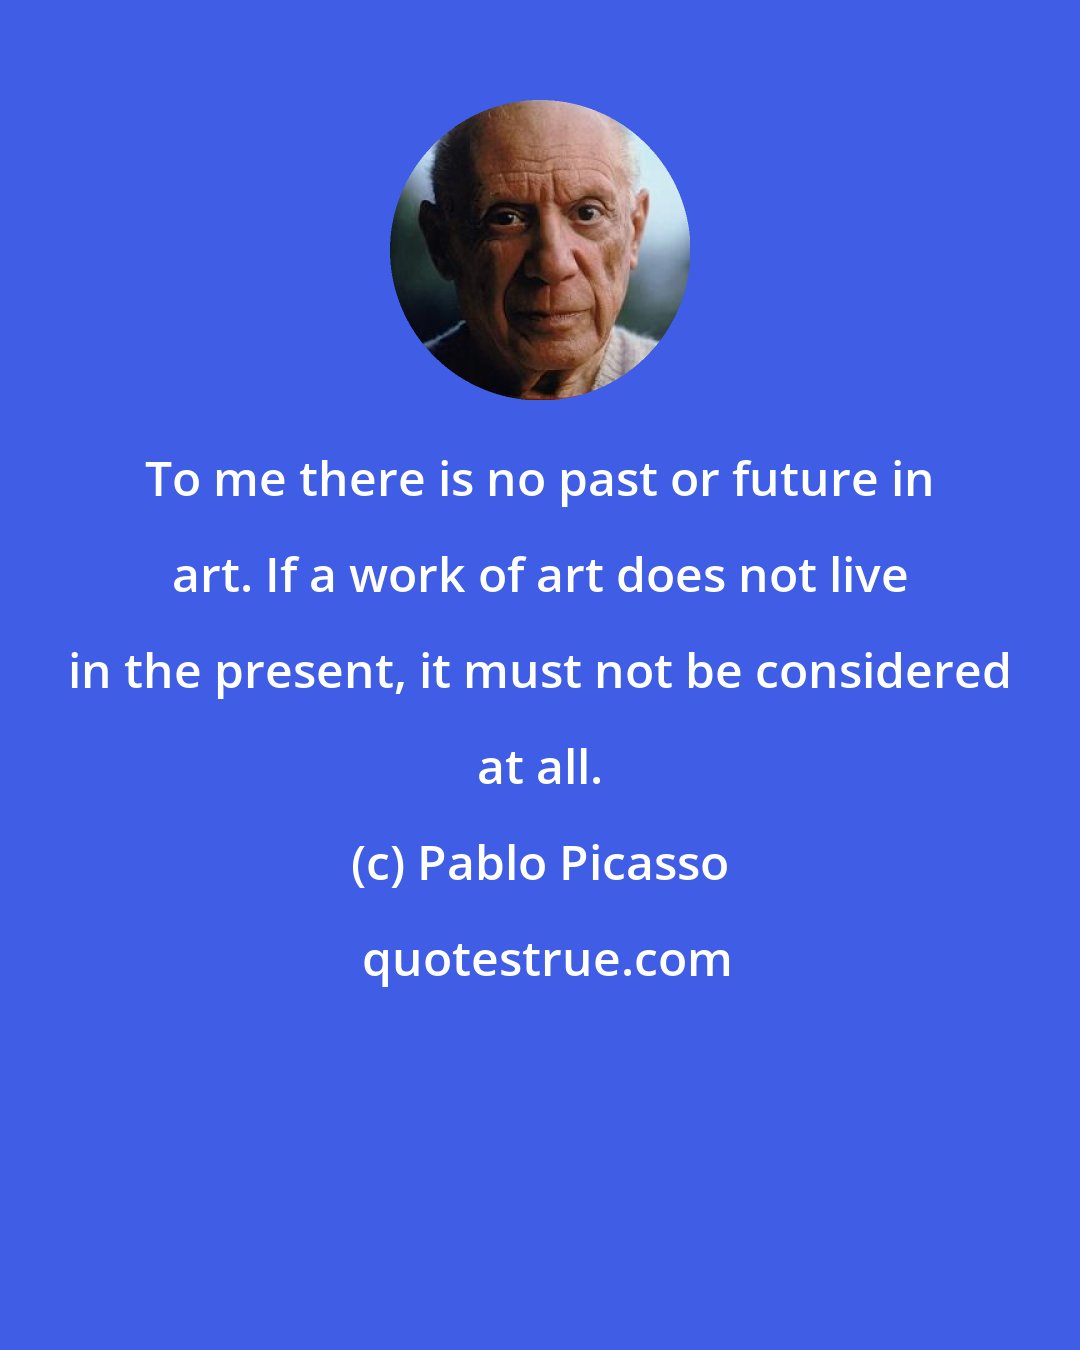 Pablo Picasso: To me there is no past or future in art. If a work of art does not live in the present, it must not be considered at all.